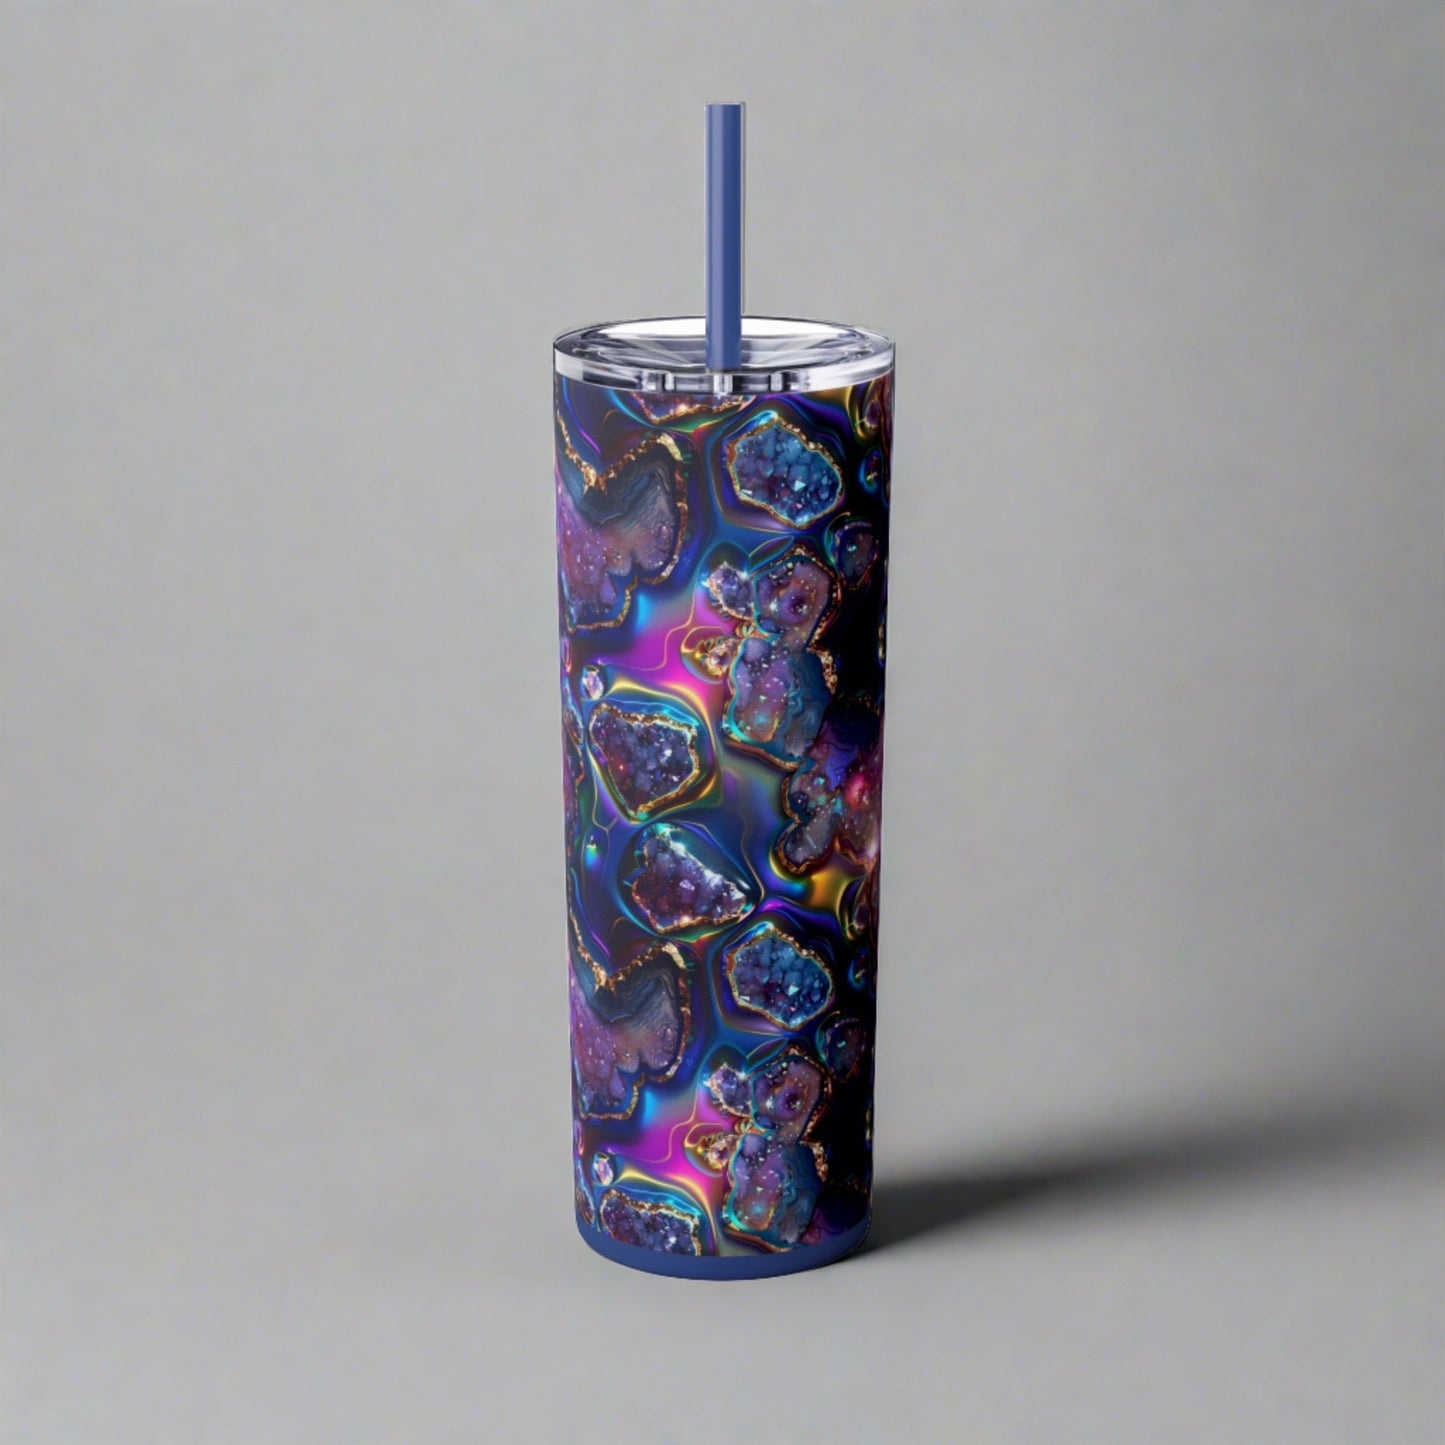 Stainless Steel Tumbler with Lid & Straw, 20 oz, Dark Chroma Geode  - Double-walled, Keeps Drinks Hot or Cold